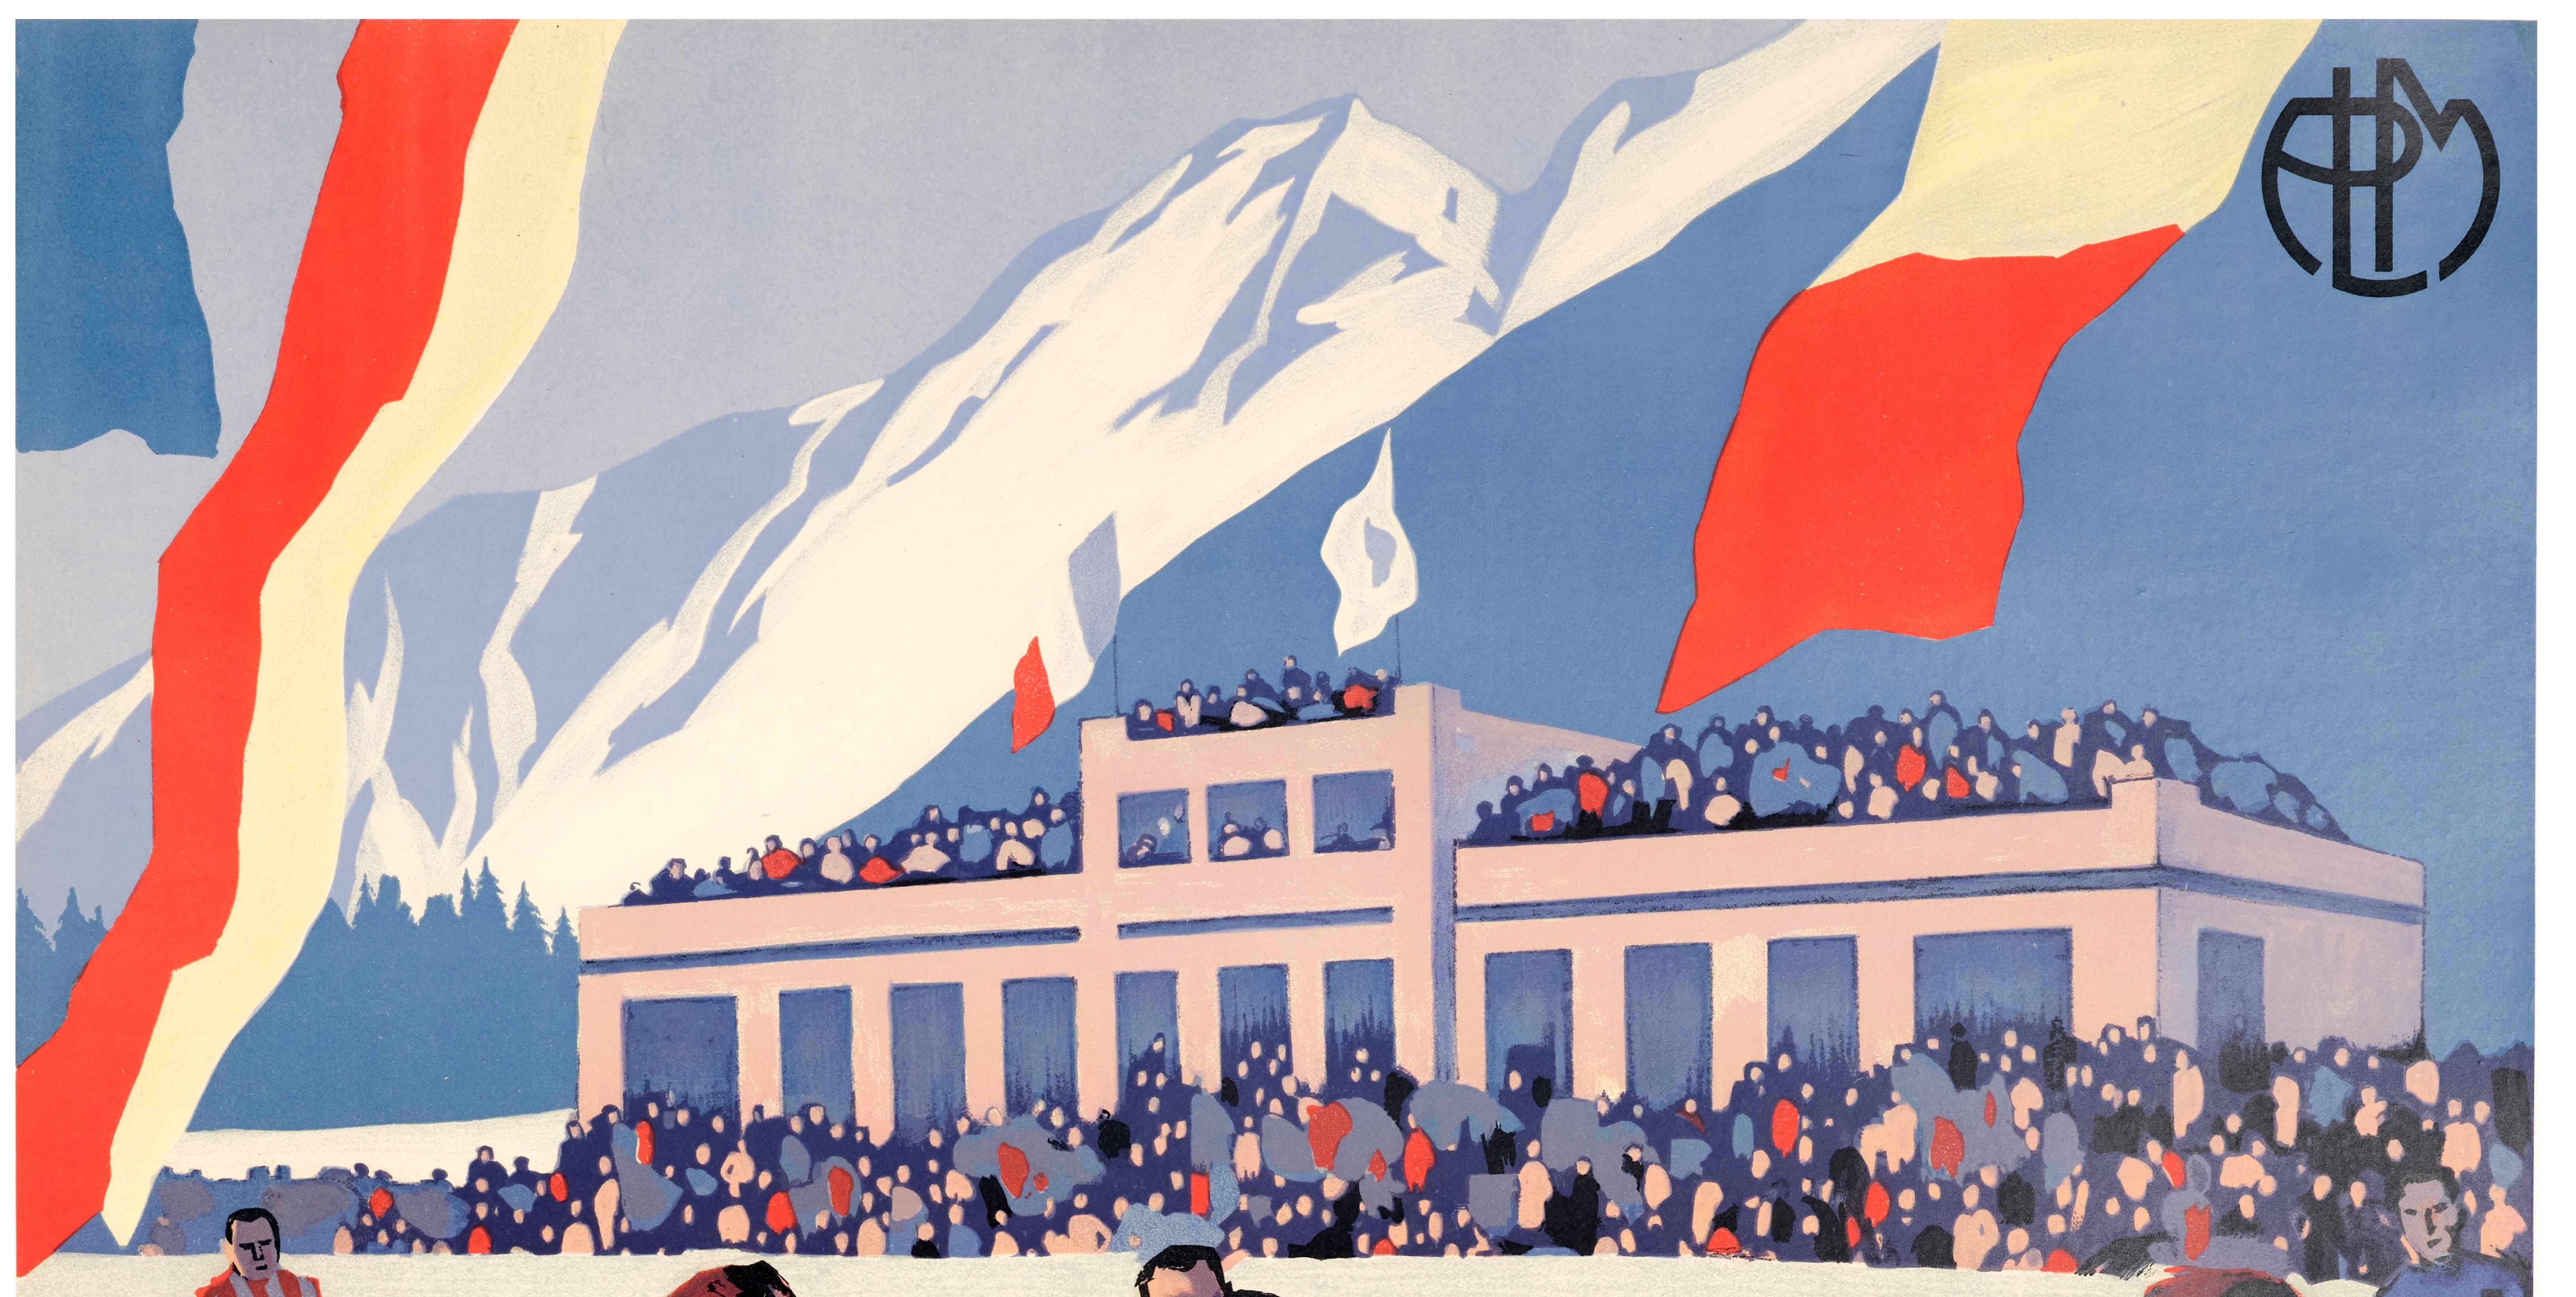 P.L.M. poster produced by Roger Broders in 1930 for the Ice Hockey World Championship in Chamonix (Alps).

Artist: Roger Broders (1883-1953)
Title: Chamonix – Mont-Blanc – Tous les sports d’hiver
Date: 1930
Size: 24.8 x 39.8 in / 63 x 101